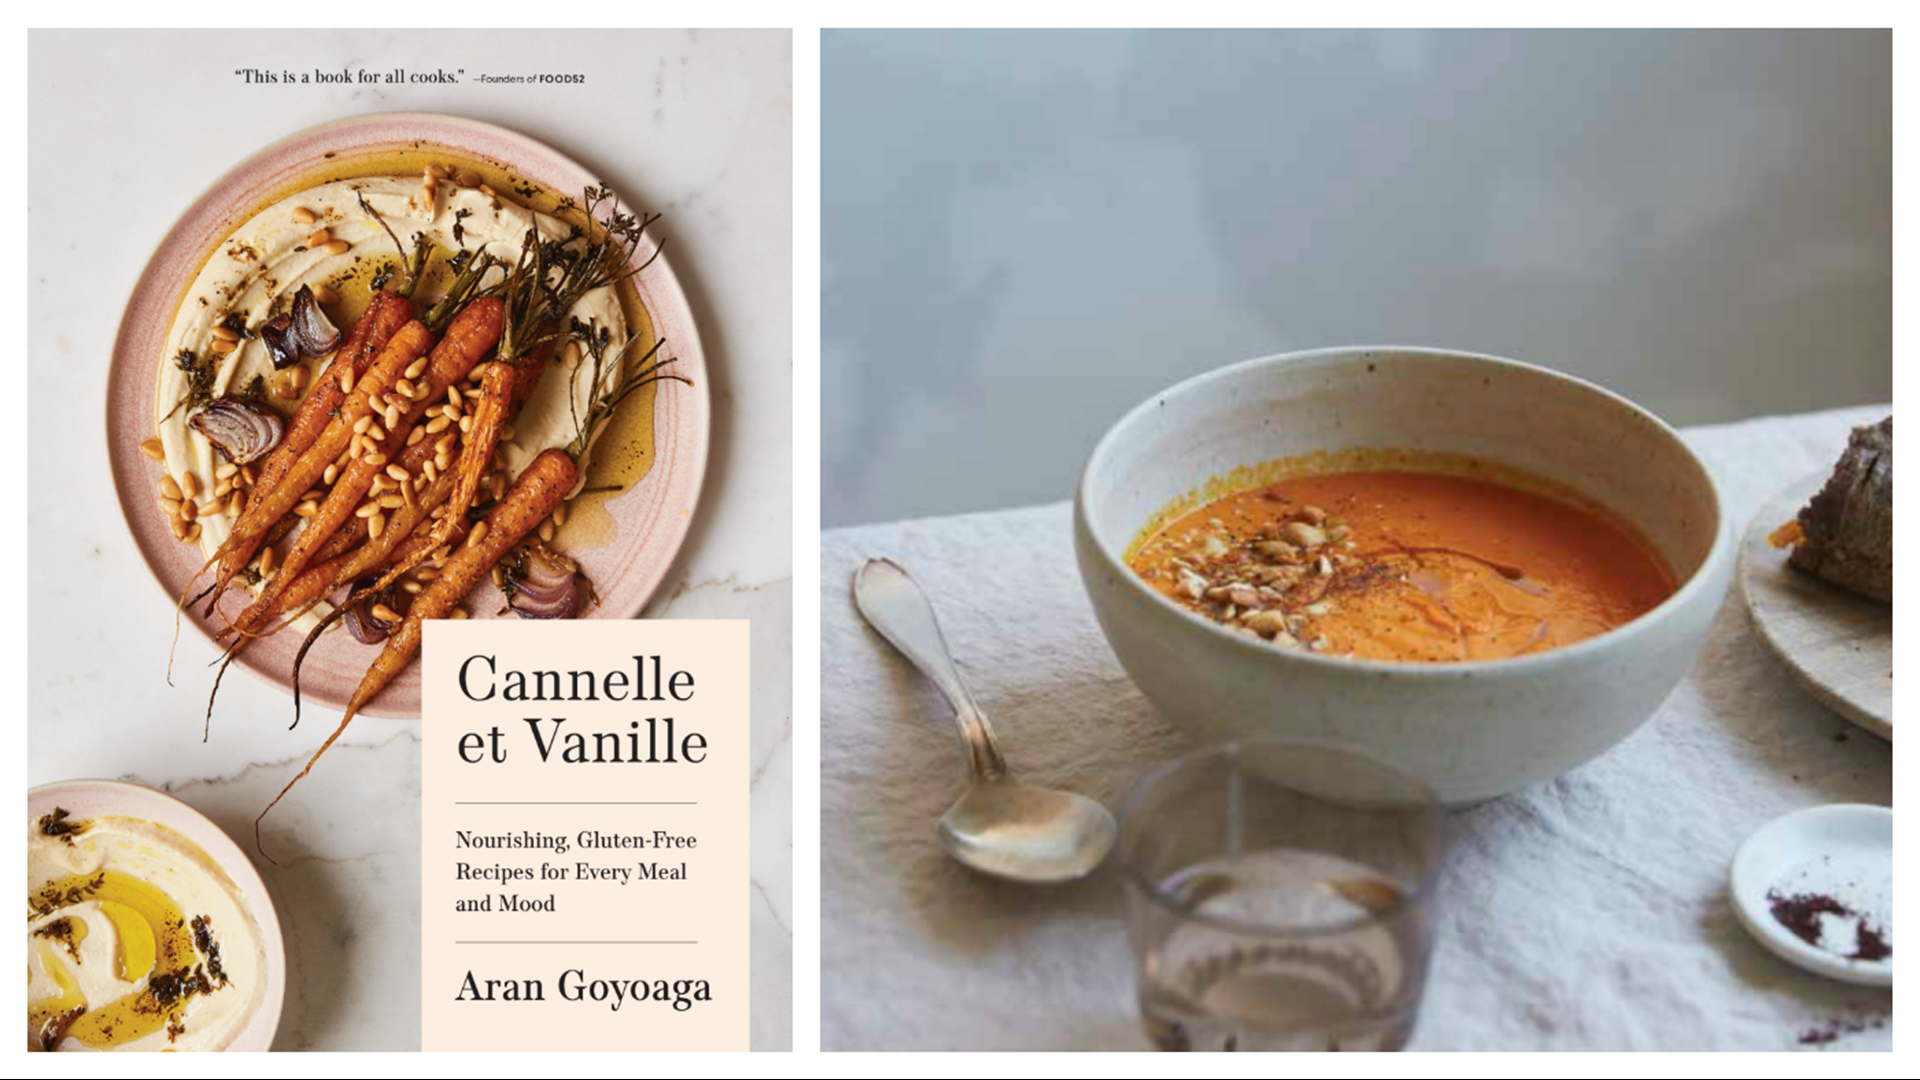 Cookbook author Aran Goyoaga shows us how to make roasted carrot and cashew soup!